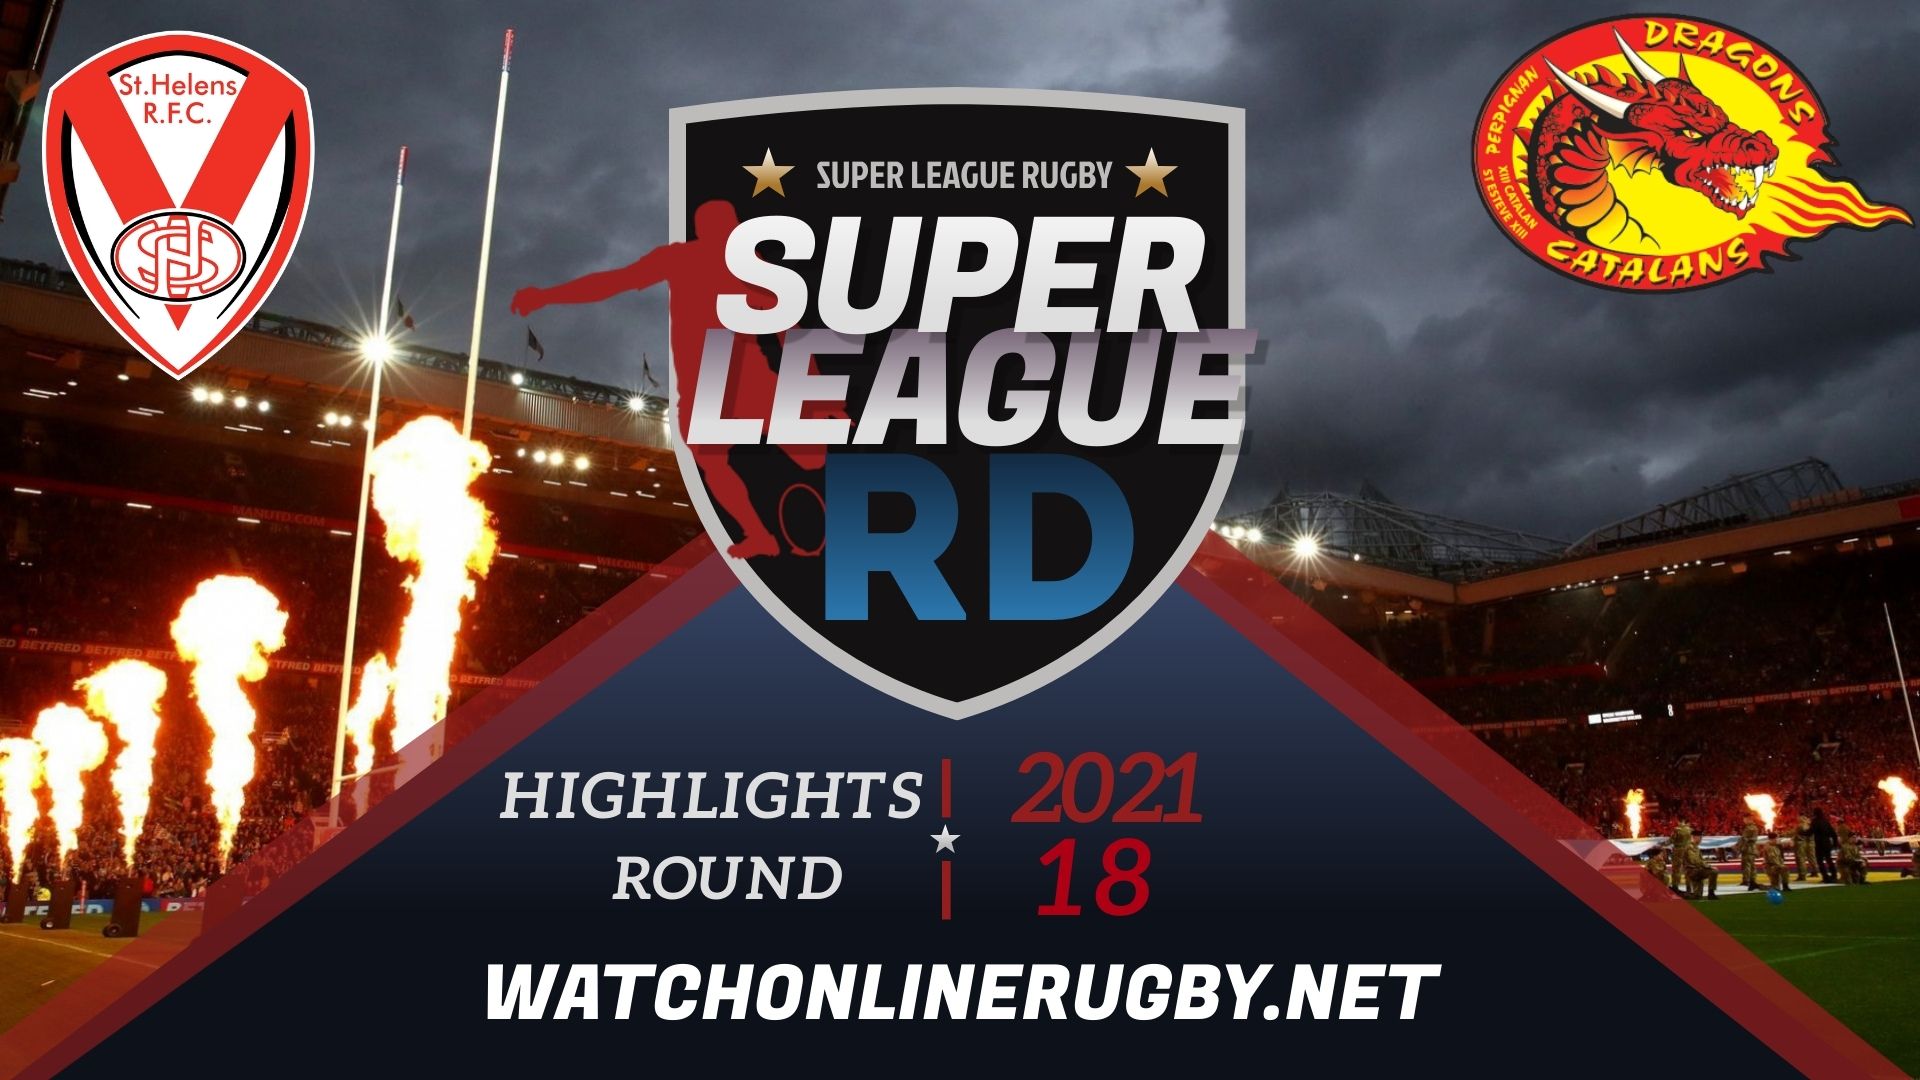 St Helens Vs Catalans Dragons Super League Rugby 2021 RD 18